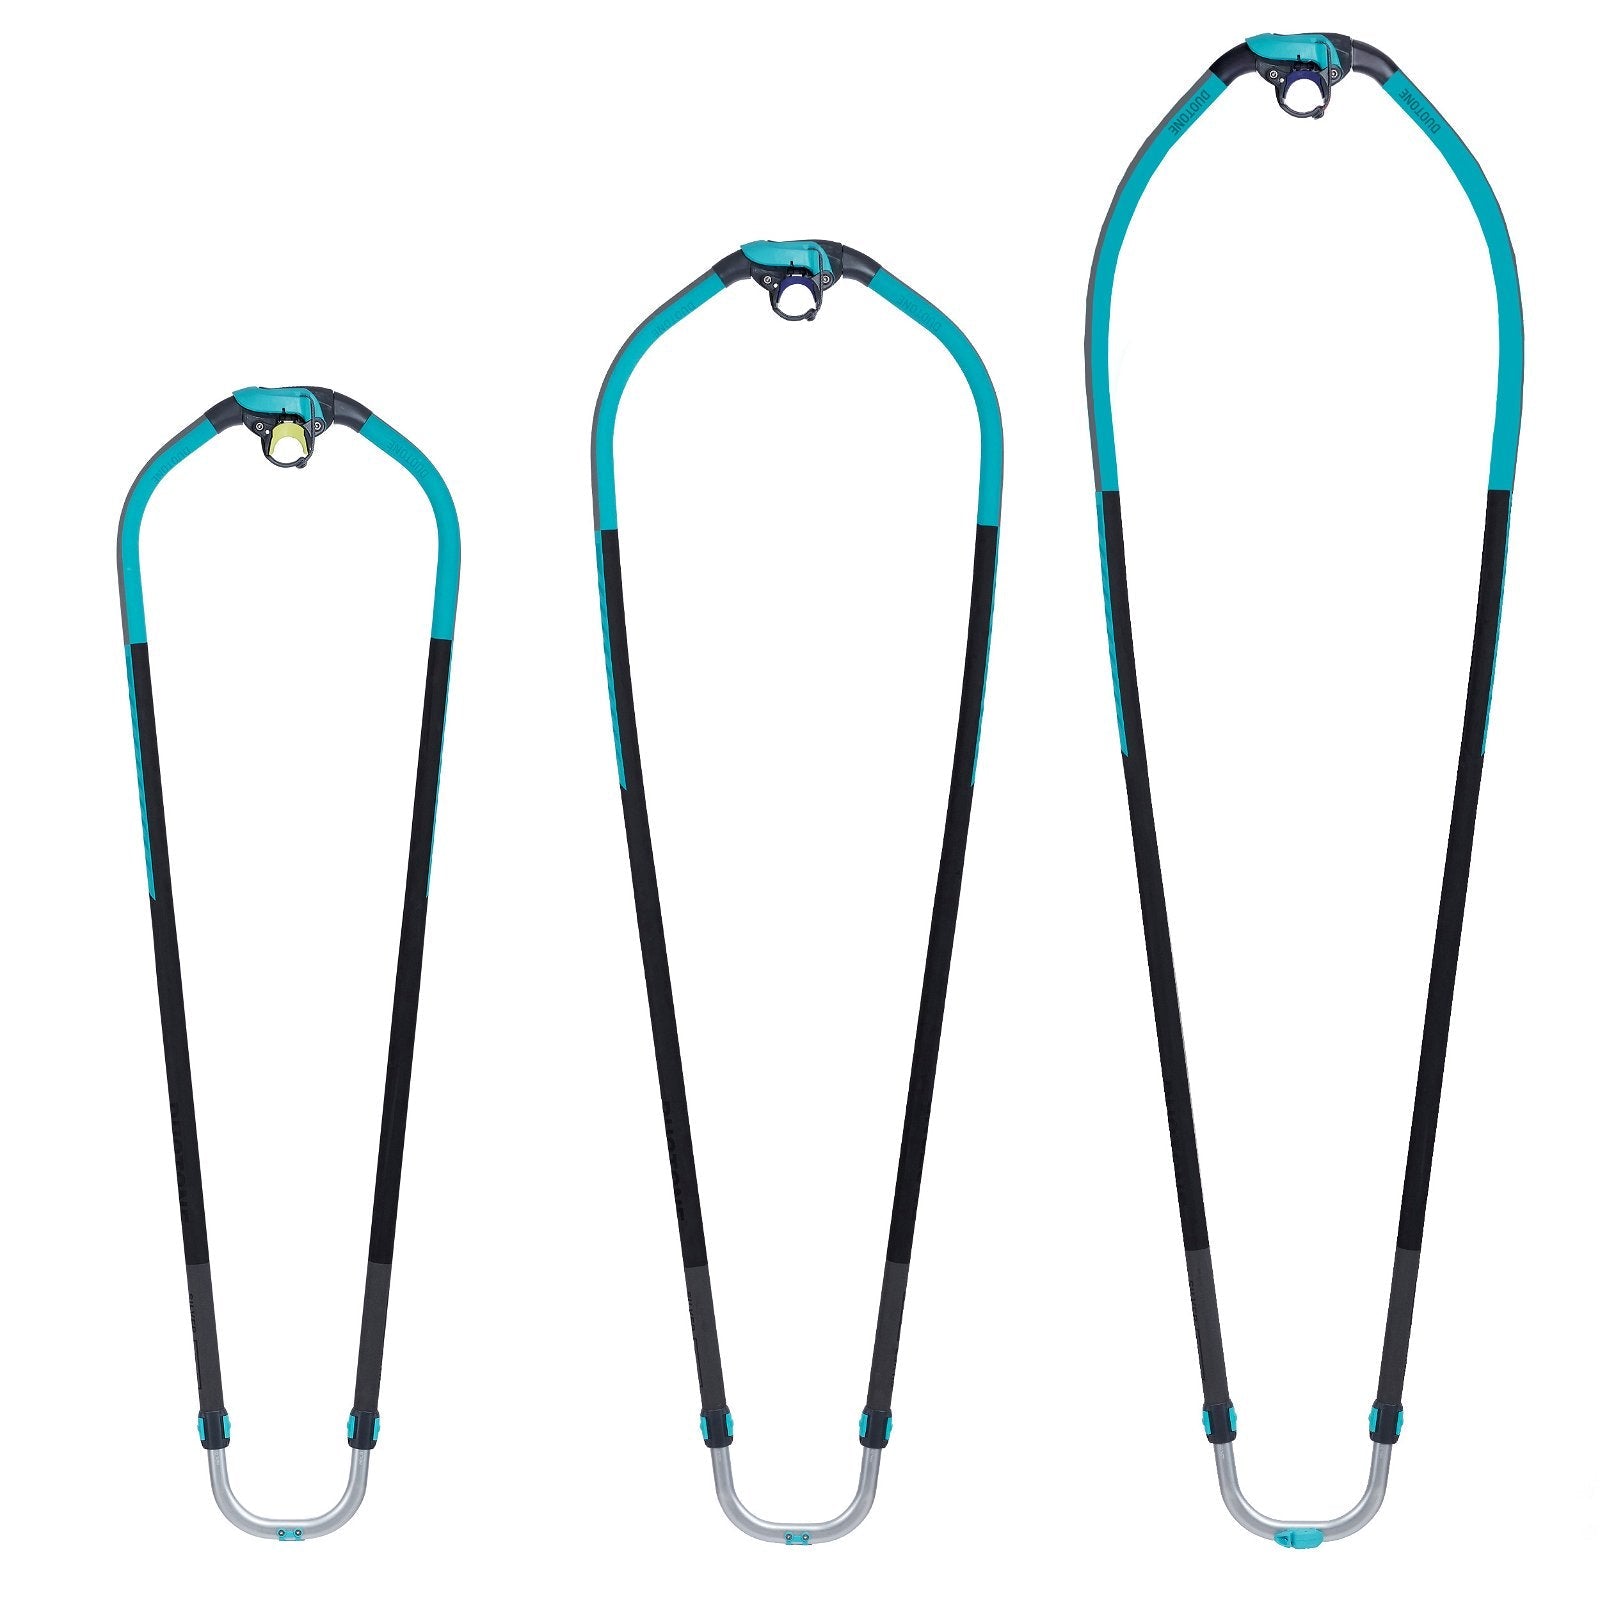 Duotone Silver Series 2023-Duotone Windsurfing-140-190 (27.5mm)-turquoise/black-14220-1401-9010583043012-Surf-store.com